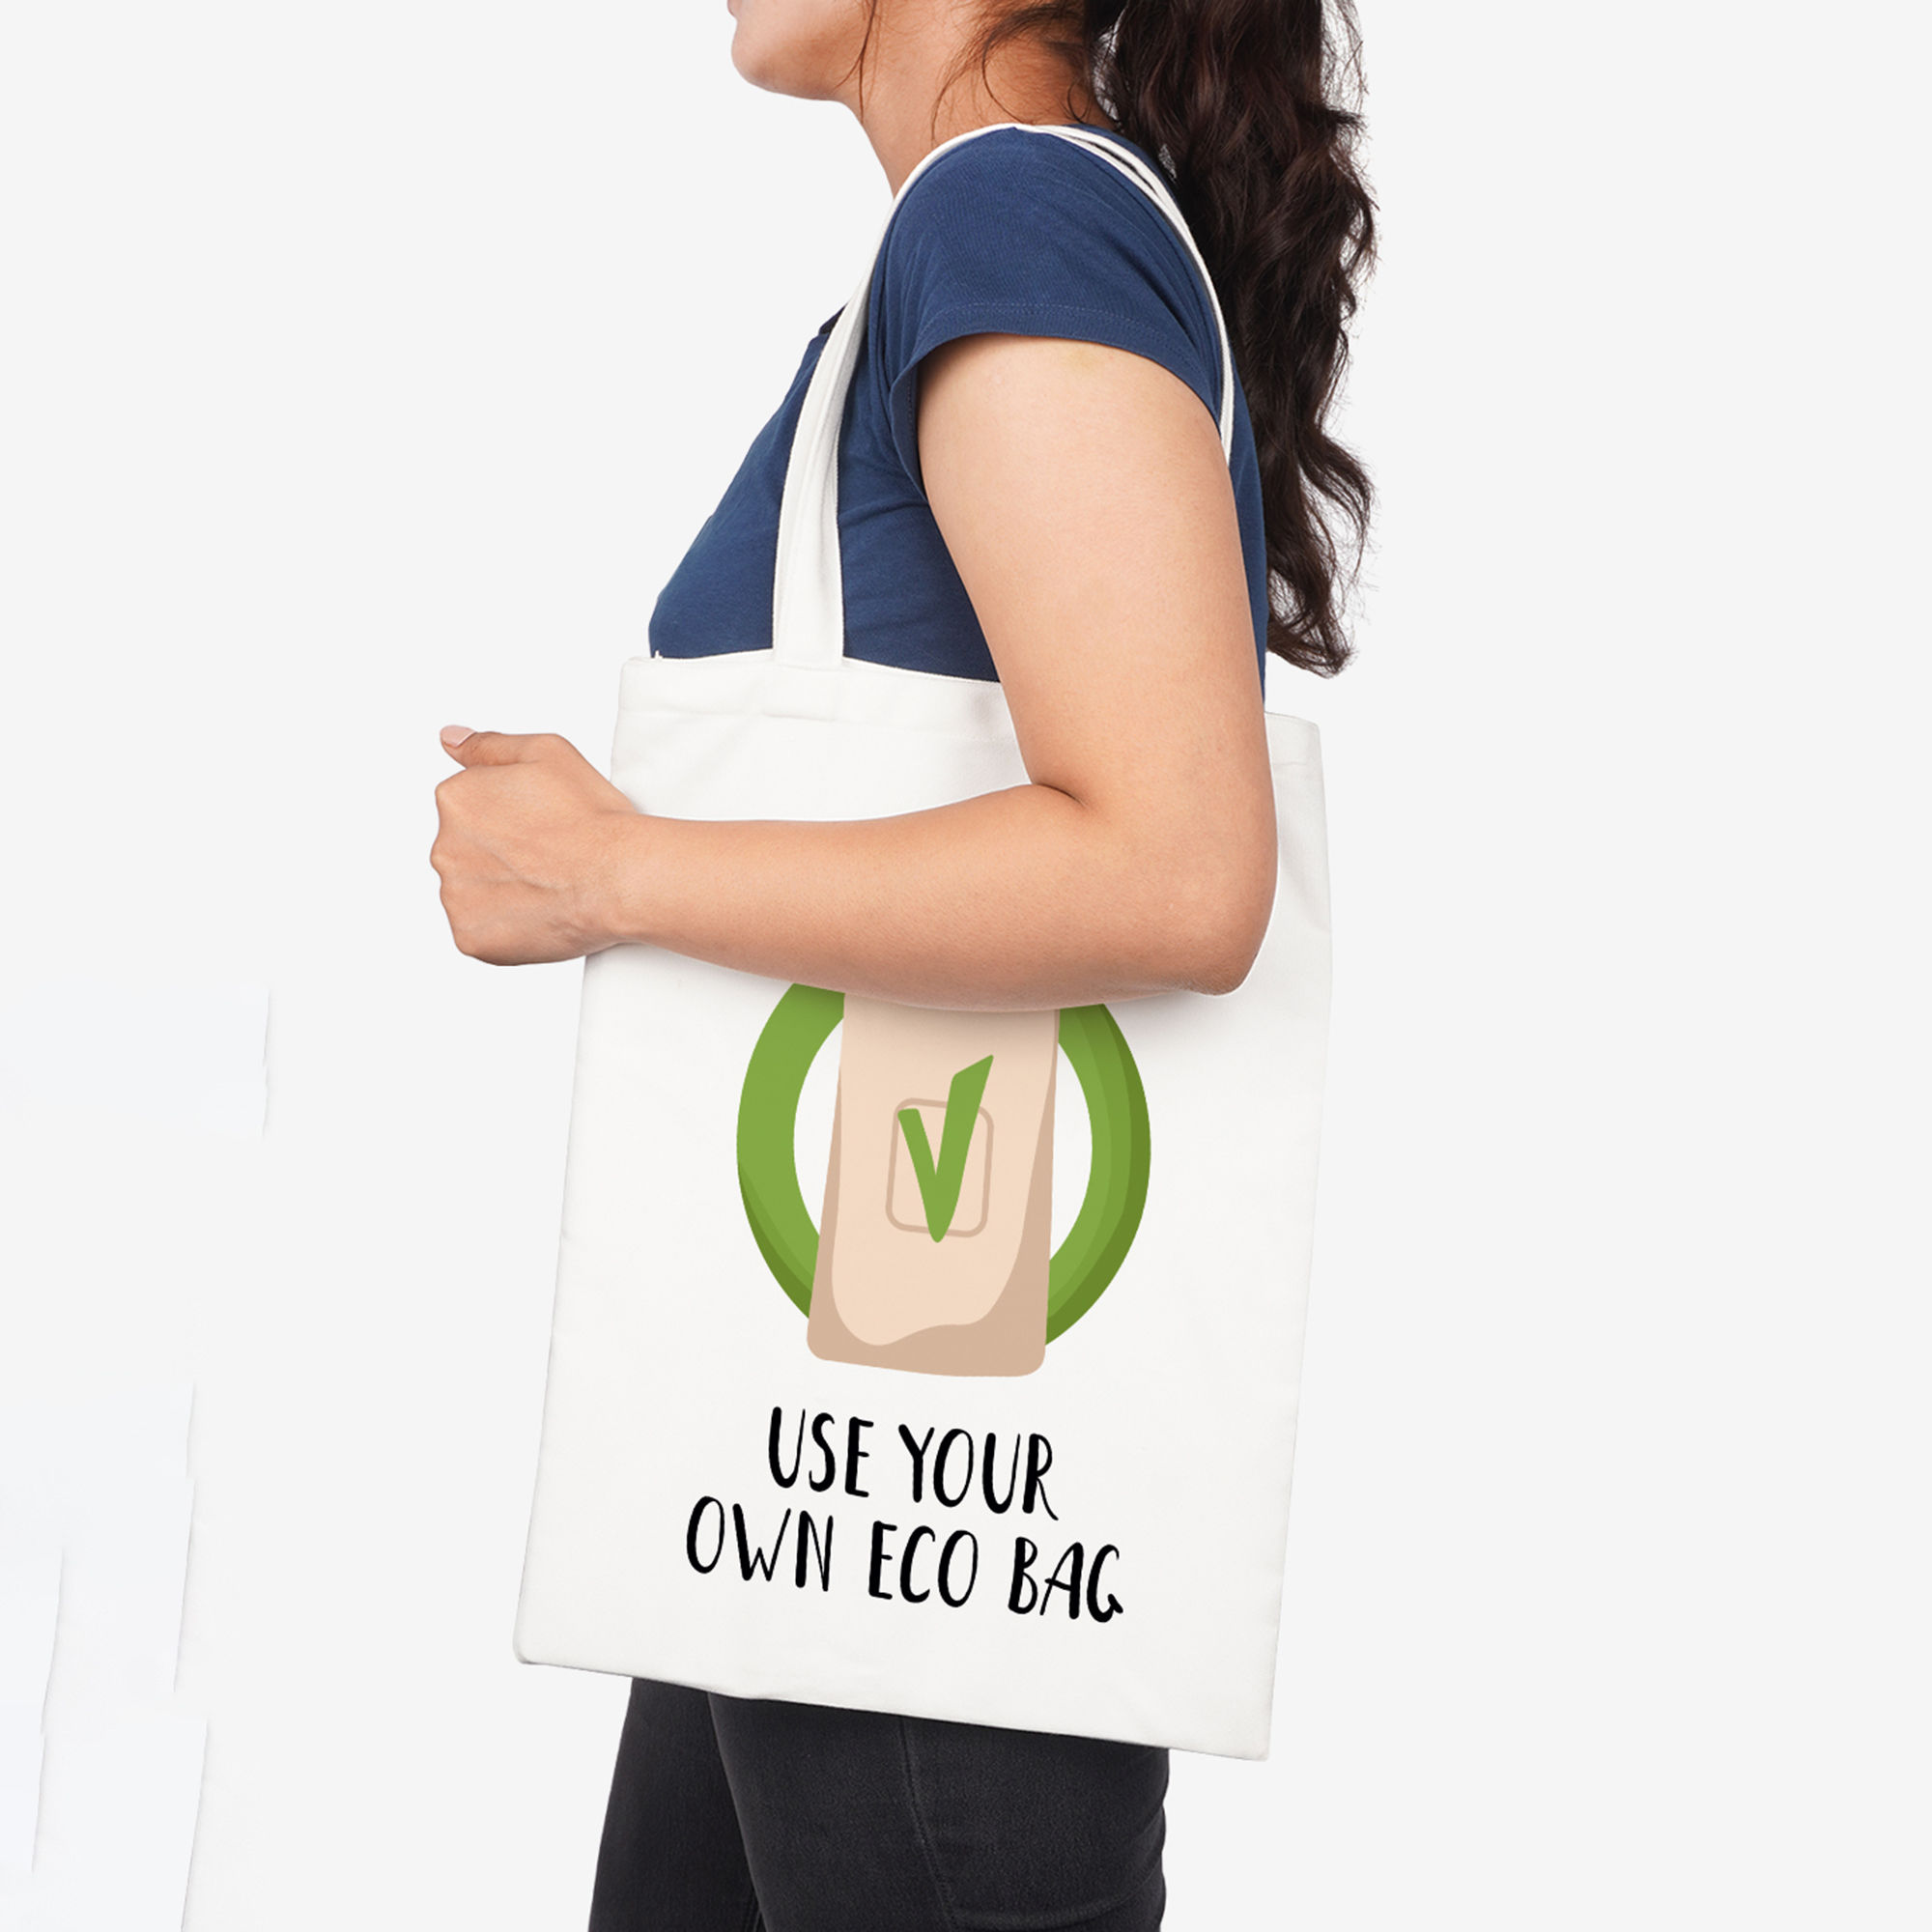 Buy Ecotribe Stylish Extra Strong Shopping Bag-Printed Canvas Cotton Bag-Ecofriendly  Tote Bag-Reusable Grocery Bag-(Pack of 1), Vegie Print-01 at Amazon.in